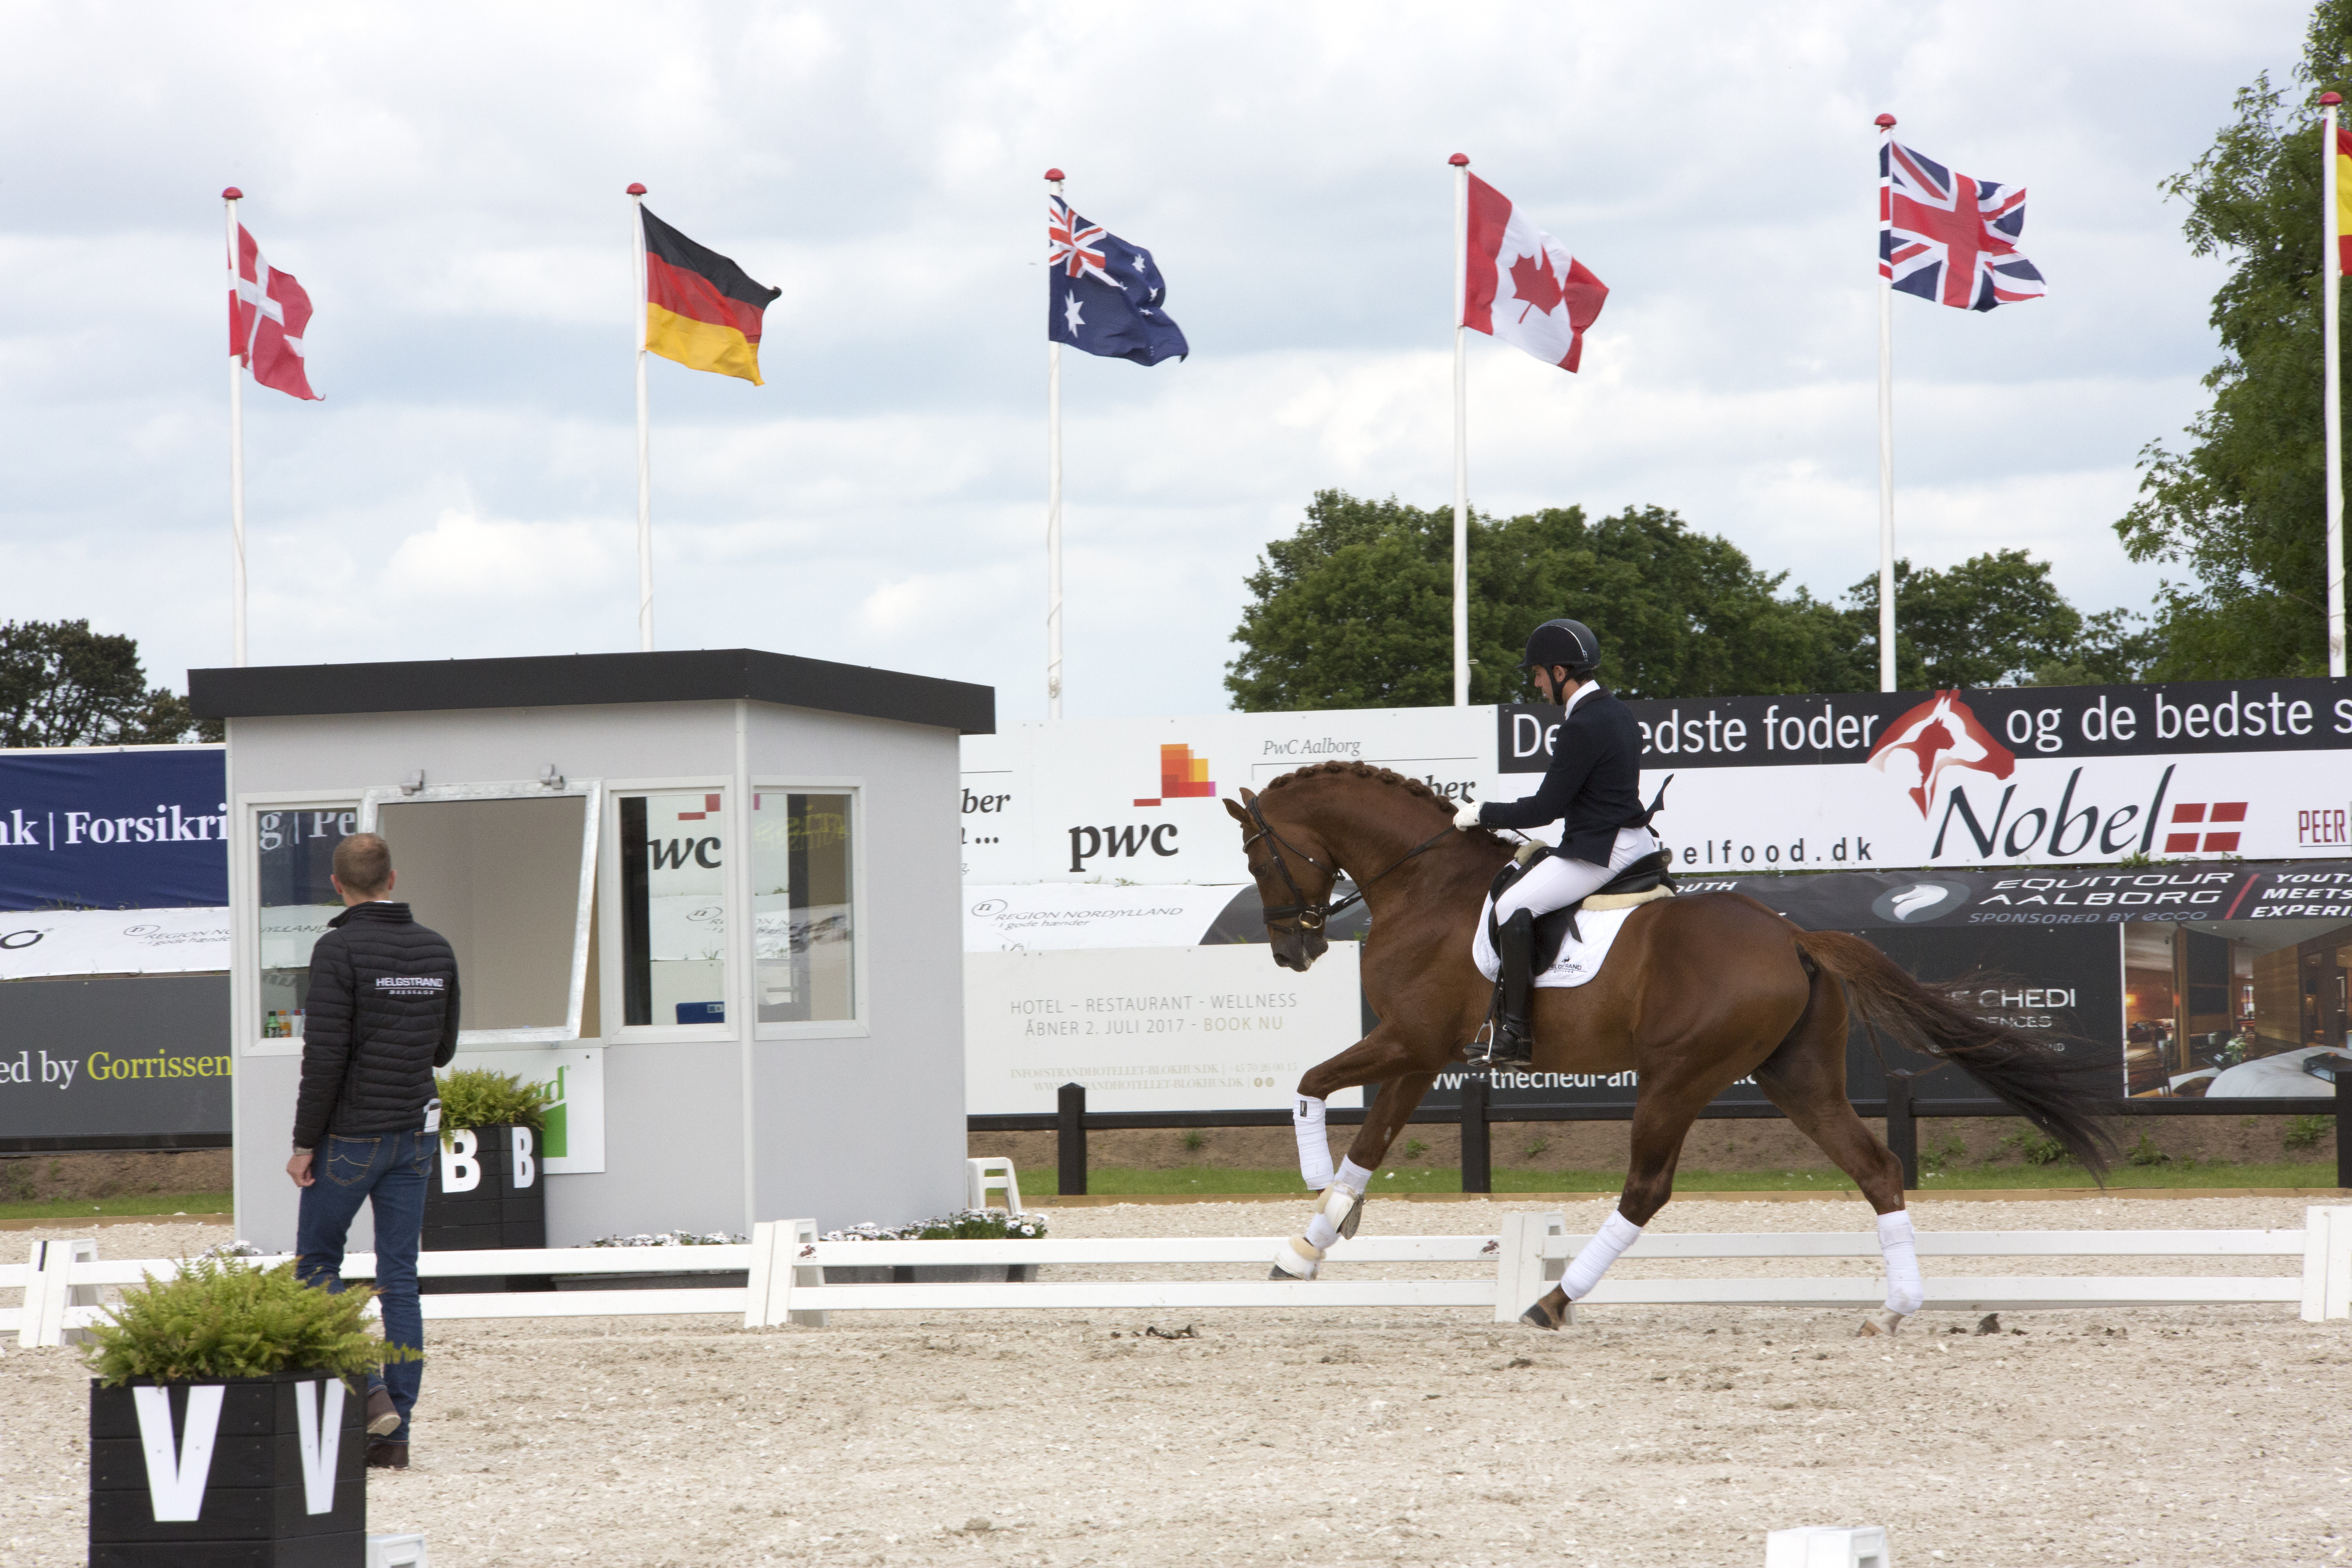 Rider and horse during Equitour Aalborg Denmark 2017